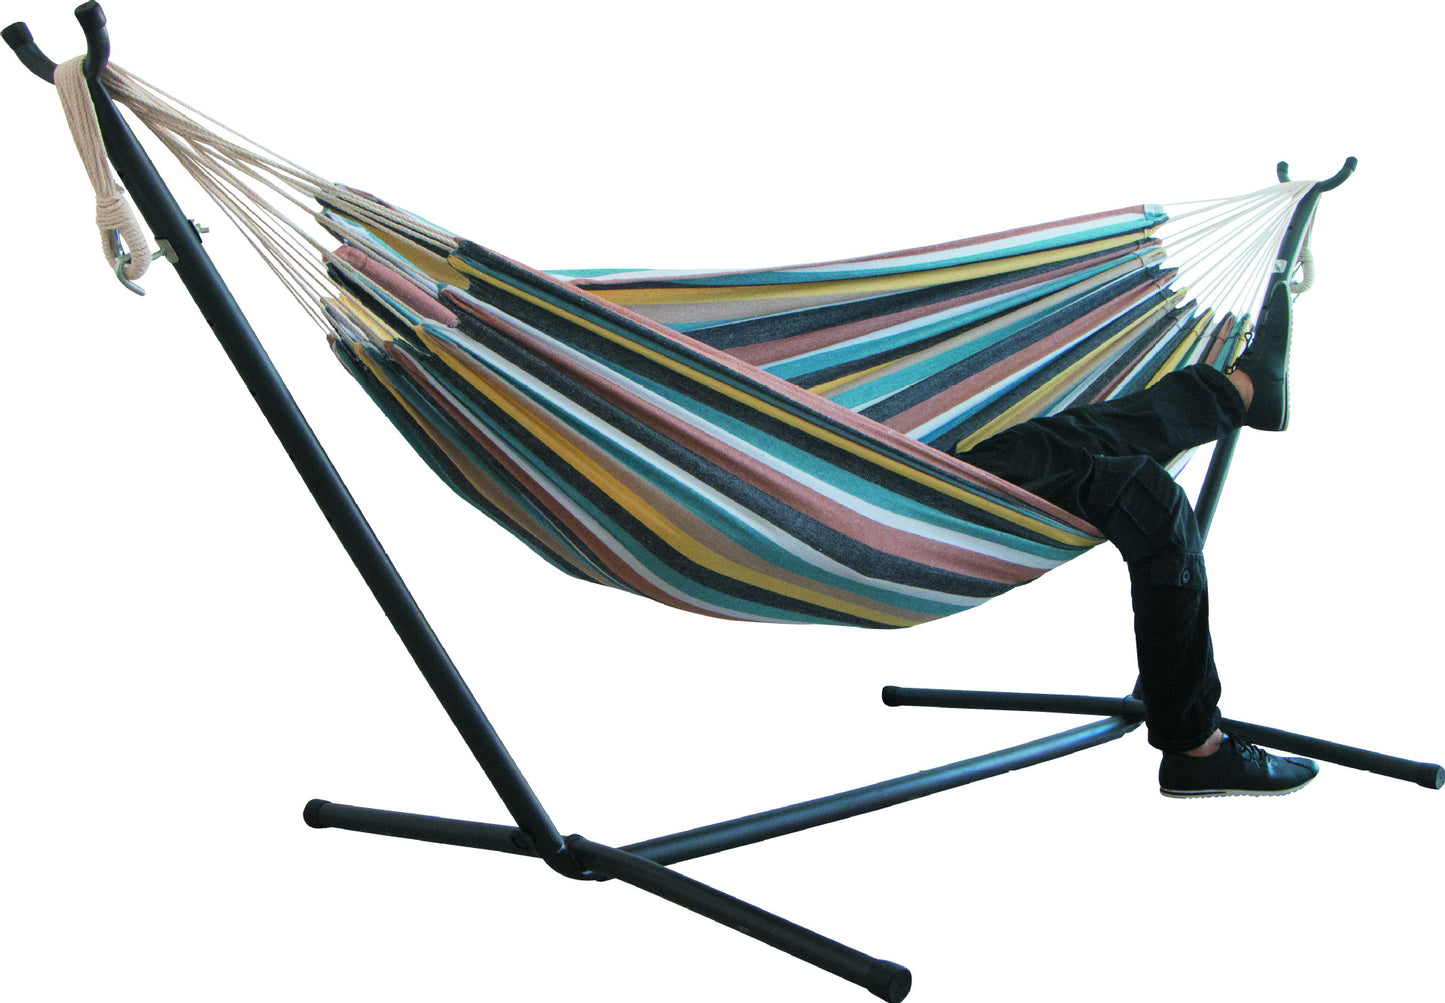 Zen Haven Double Wide Canvas Hammock Chair for Relaxing or Camping